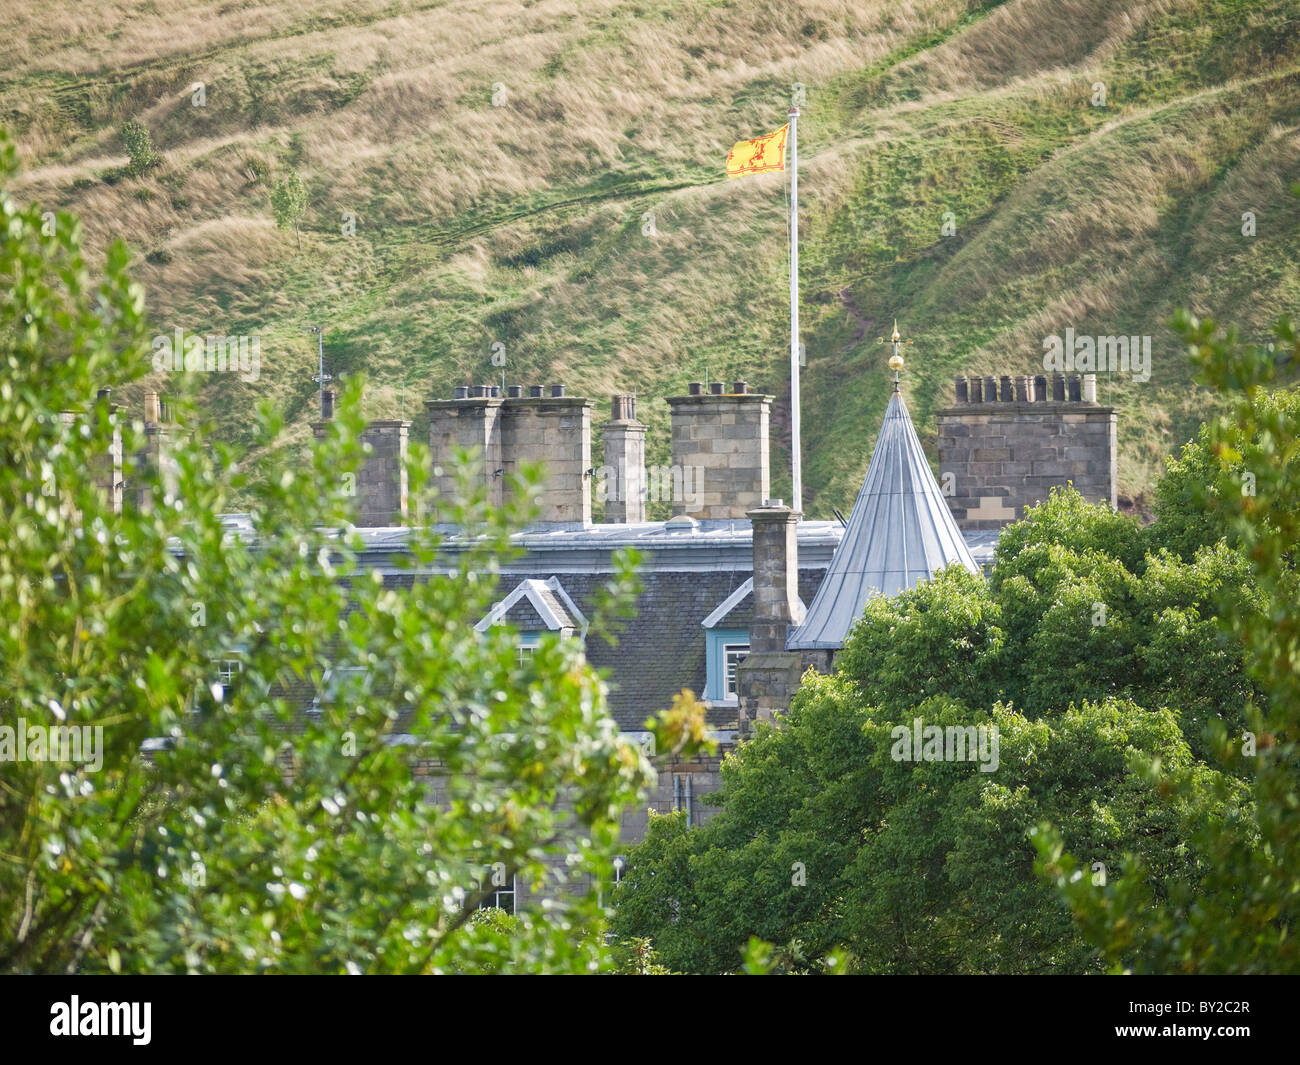 The Queens residence, Holyrood Palace, through the trees with Arthur's Seat in the background, Edinburgh, Scotland. Stock Photo